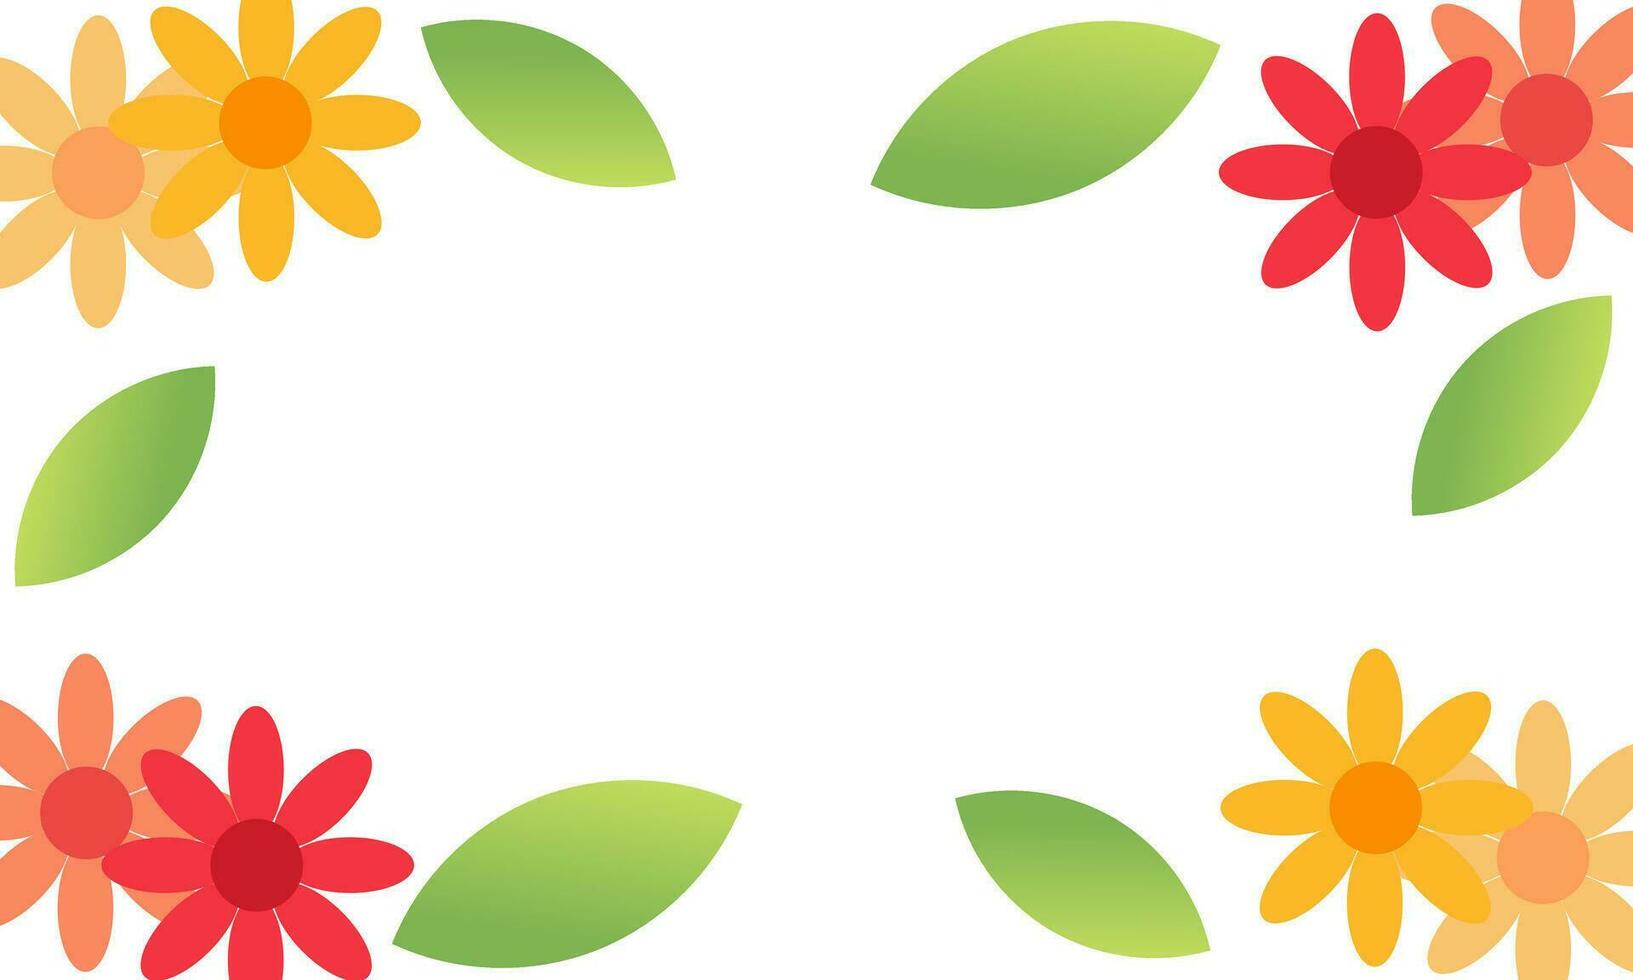 flower and leaf background with a nature theme2 vector